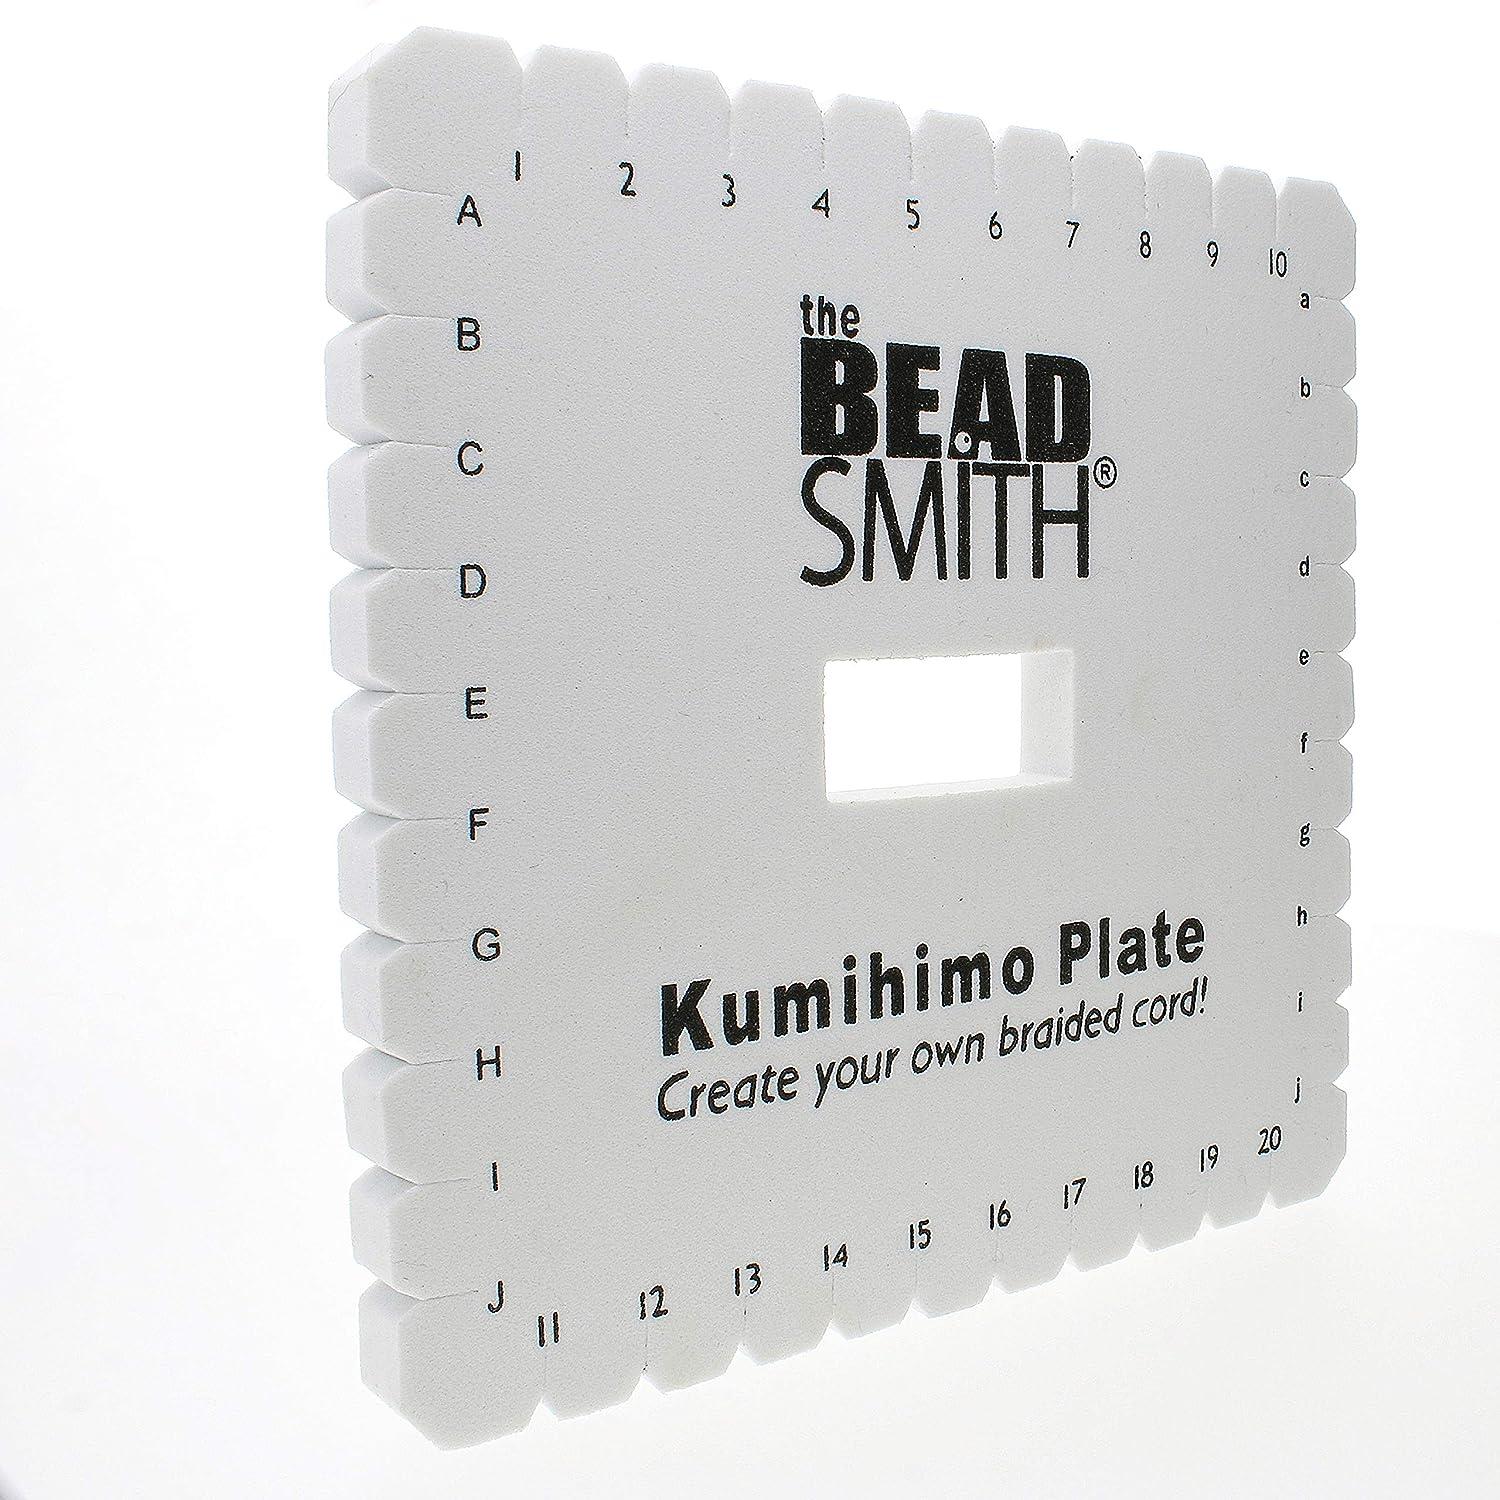 The Beadsmith Round Kumihimo Disk, 6 inch Diameter, 0.75” (20mm) Thick  Double Dense Foam, 64 Numbered Slots, Jewelry Tools for Braiding